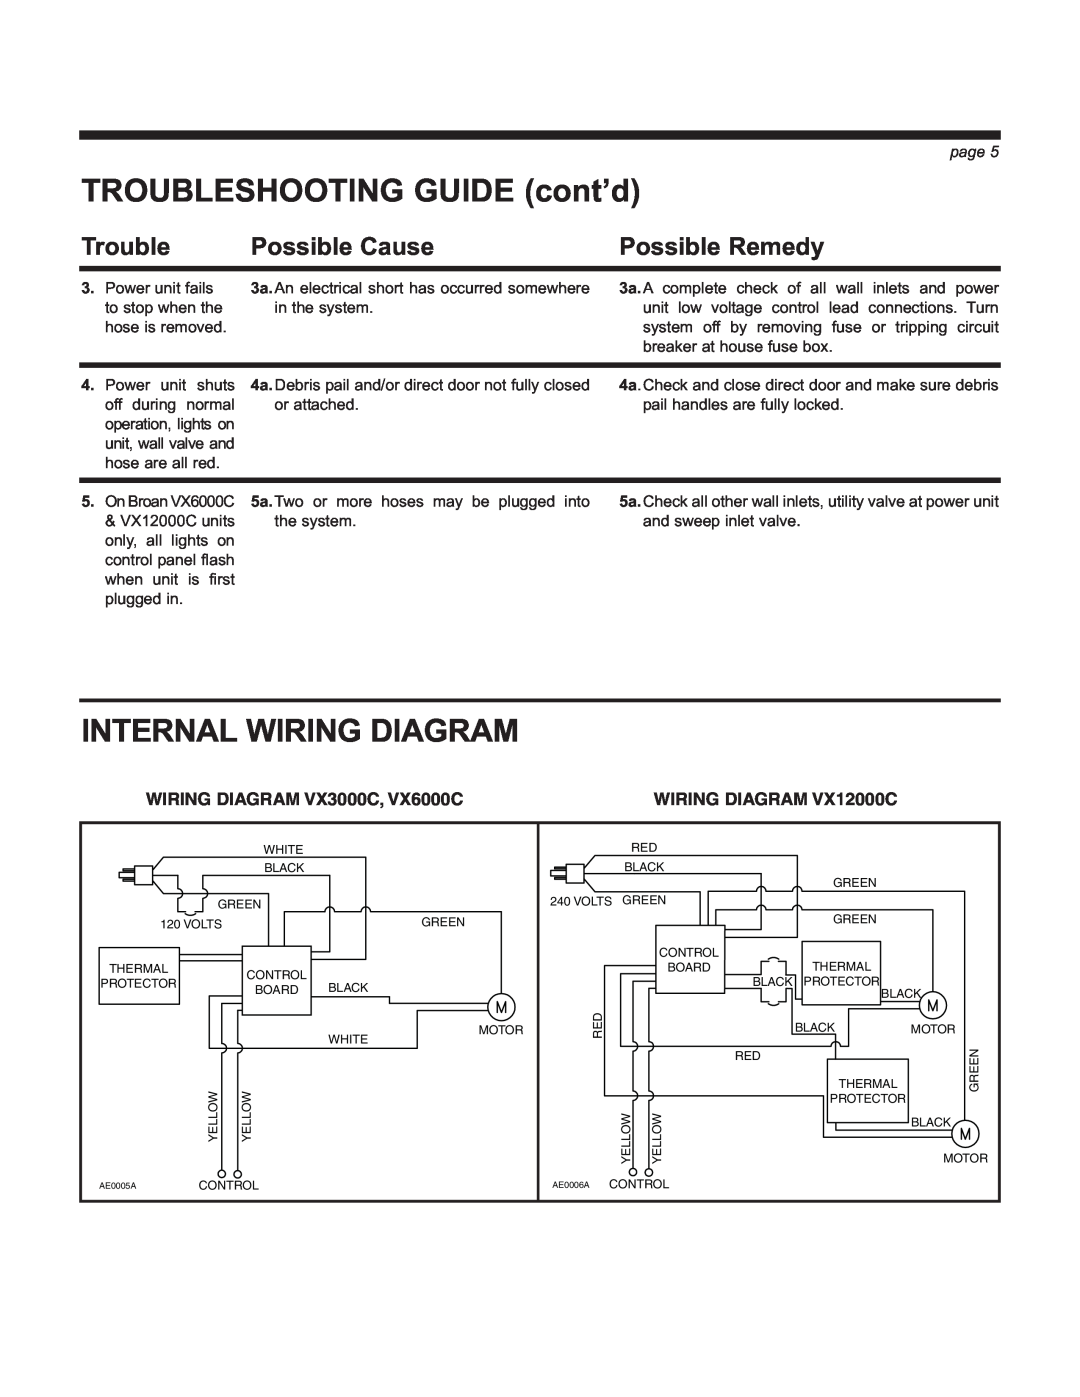 Broan VX12000C manual TROUBLESHOOTING GUIDE cont’d, Internal Wiring Diagram, Trouble, Possible Cause, Possible Remedy, page 